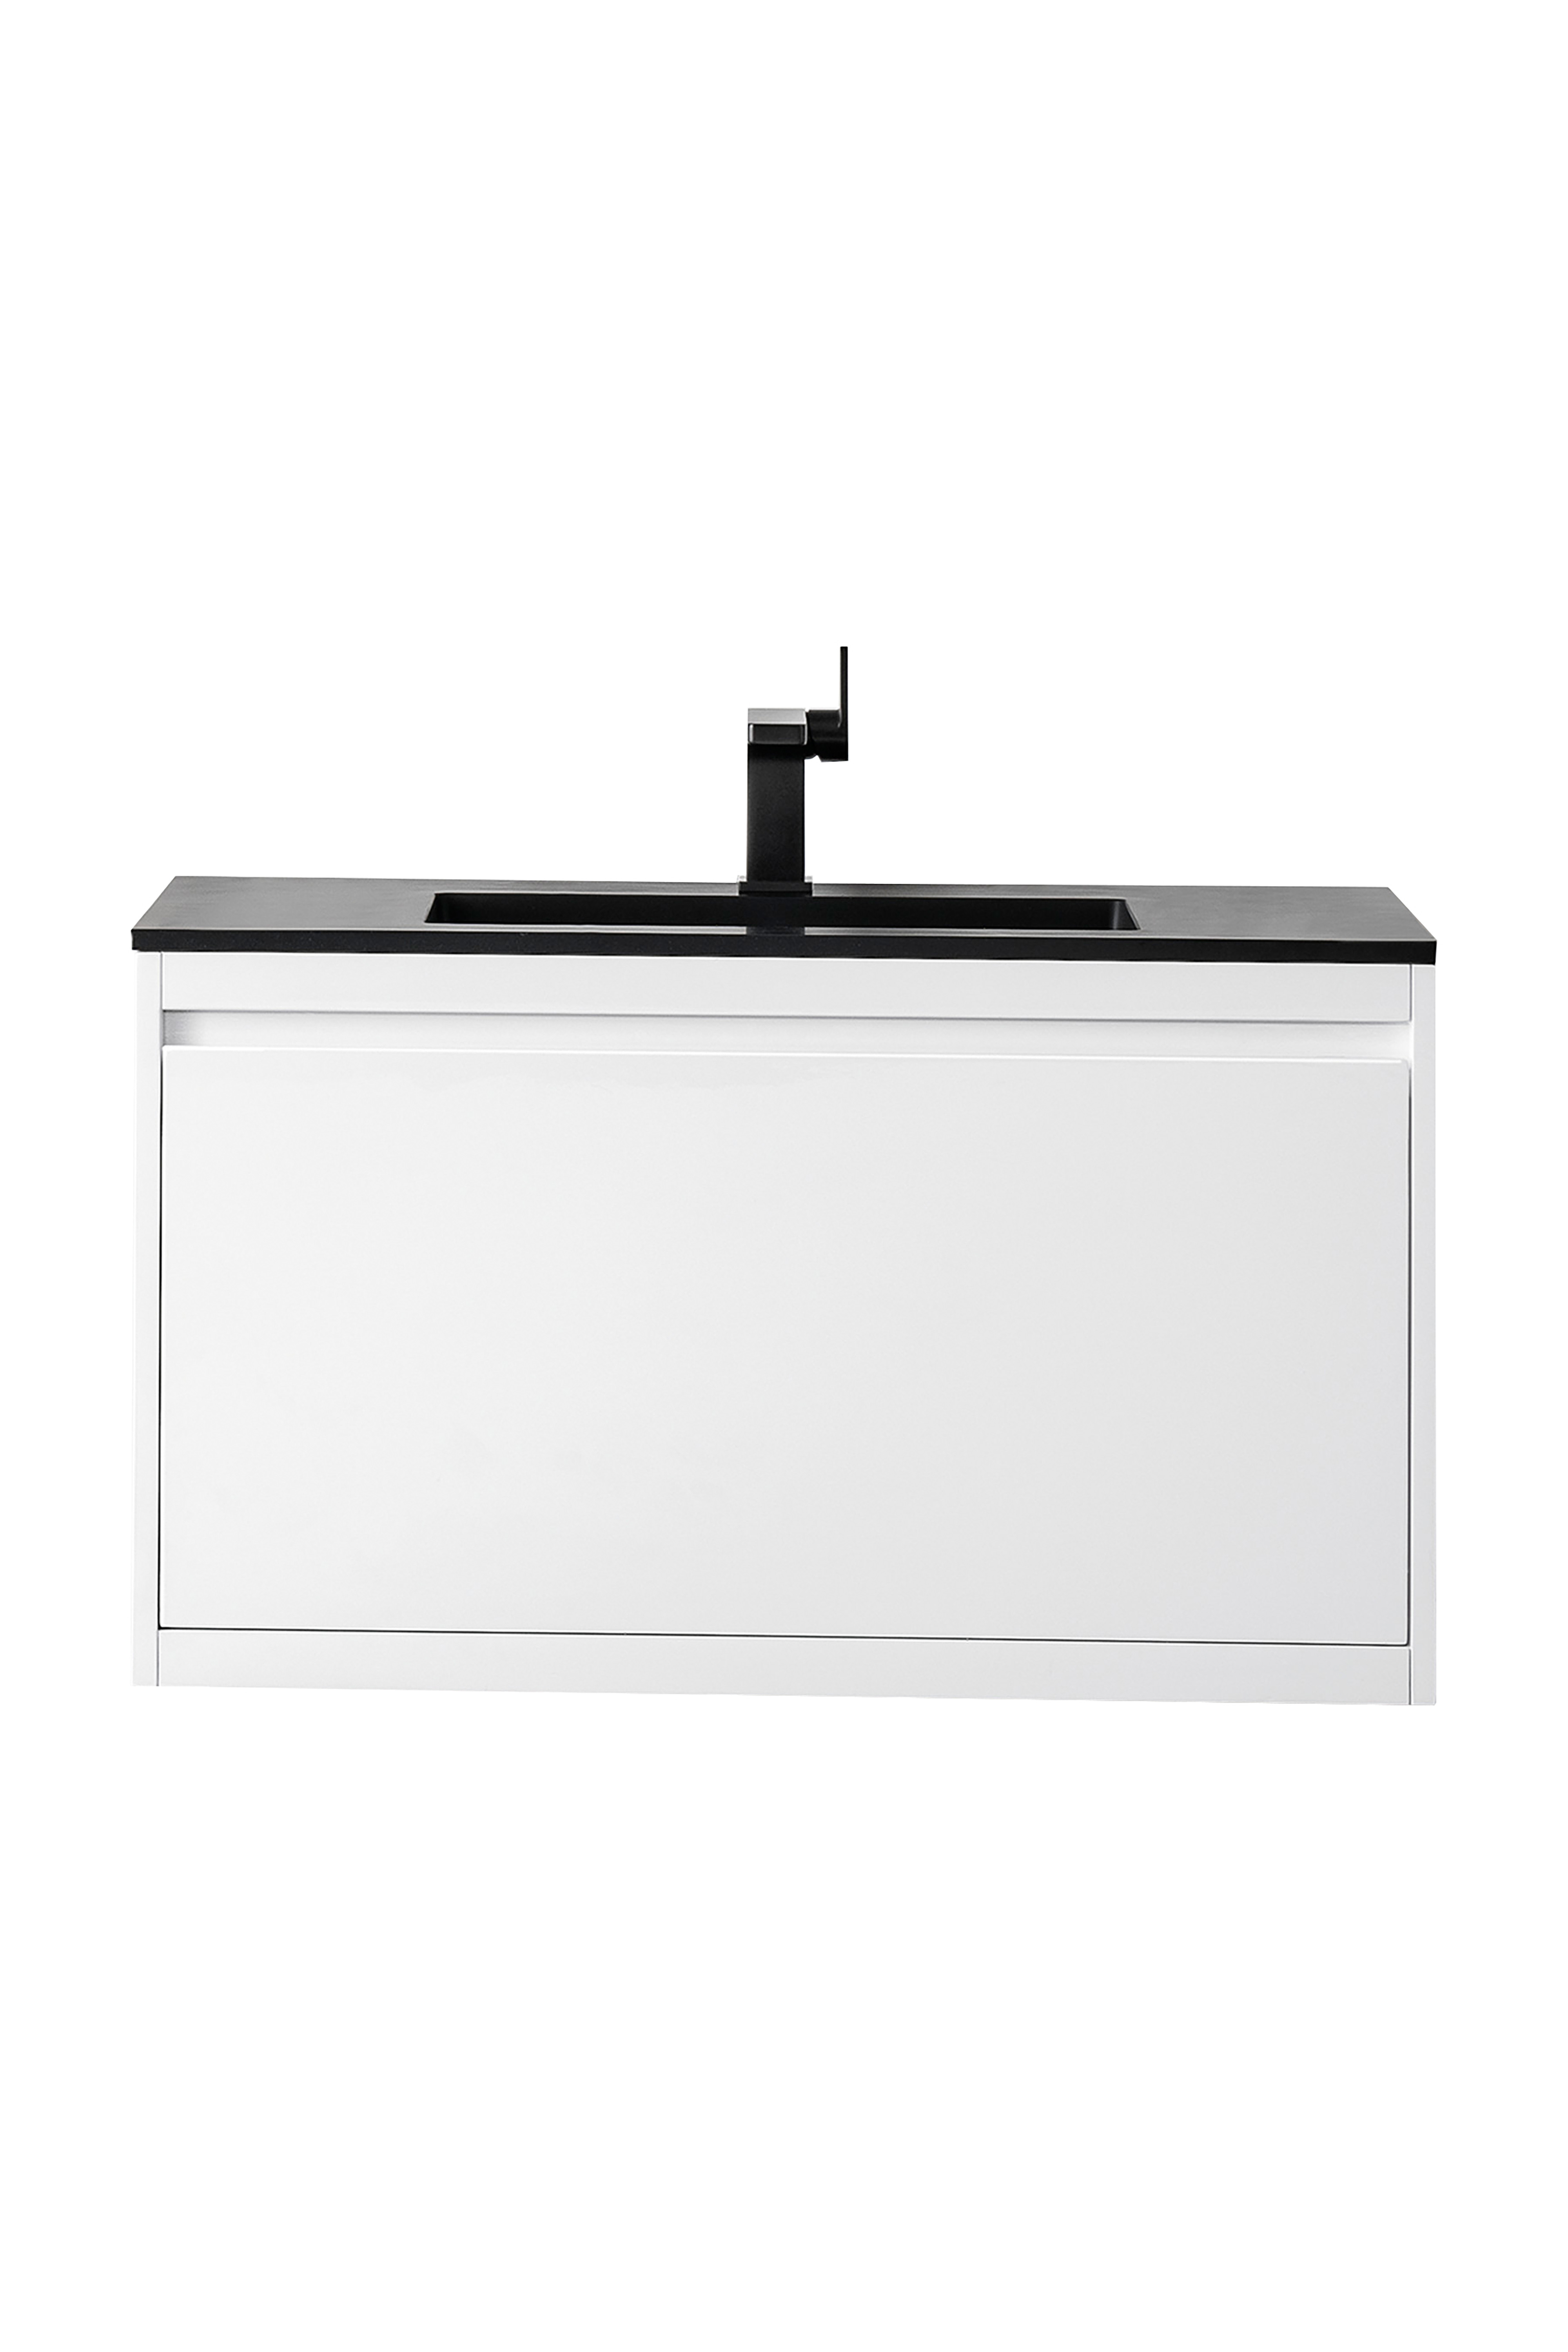 James Martin 801V35.4GWCHB Milan 35.4" Single Vanity Cabinet, Glossy White w/Charcoal Black Composite Top